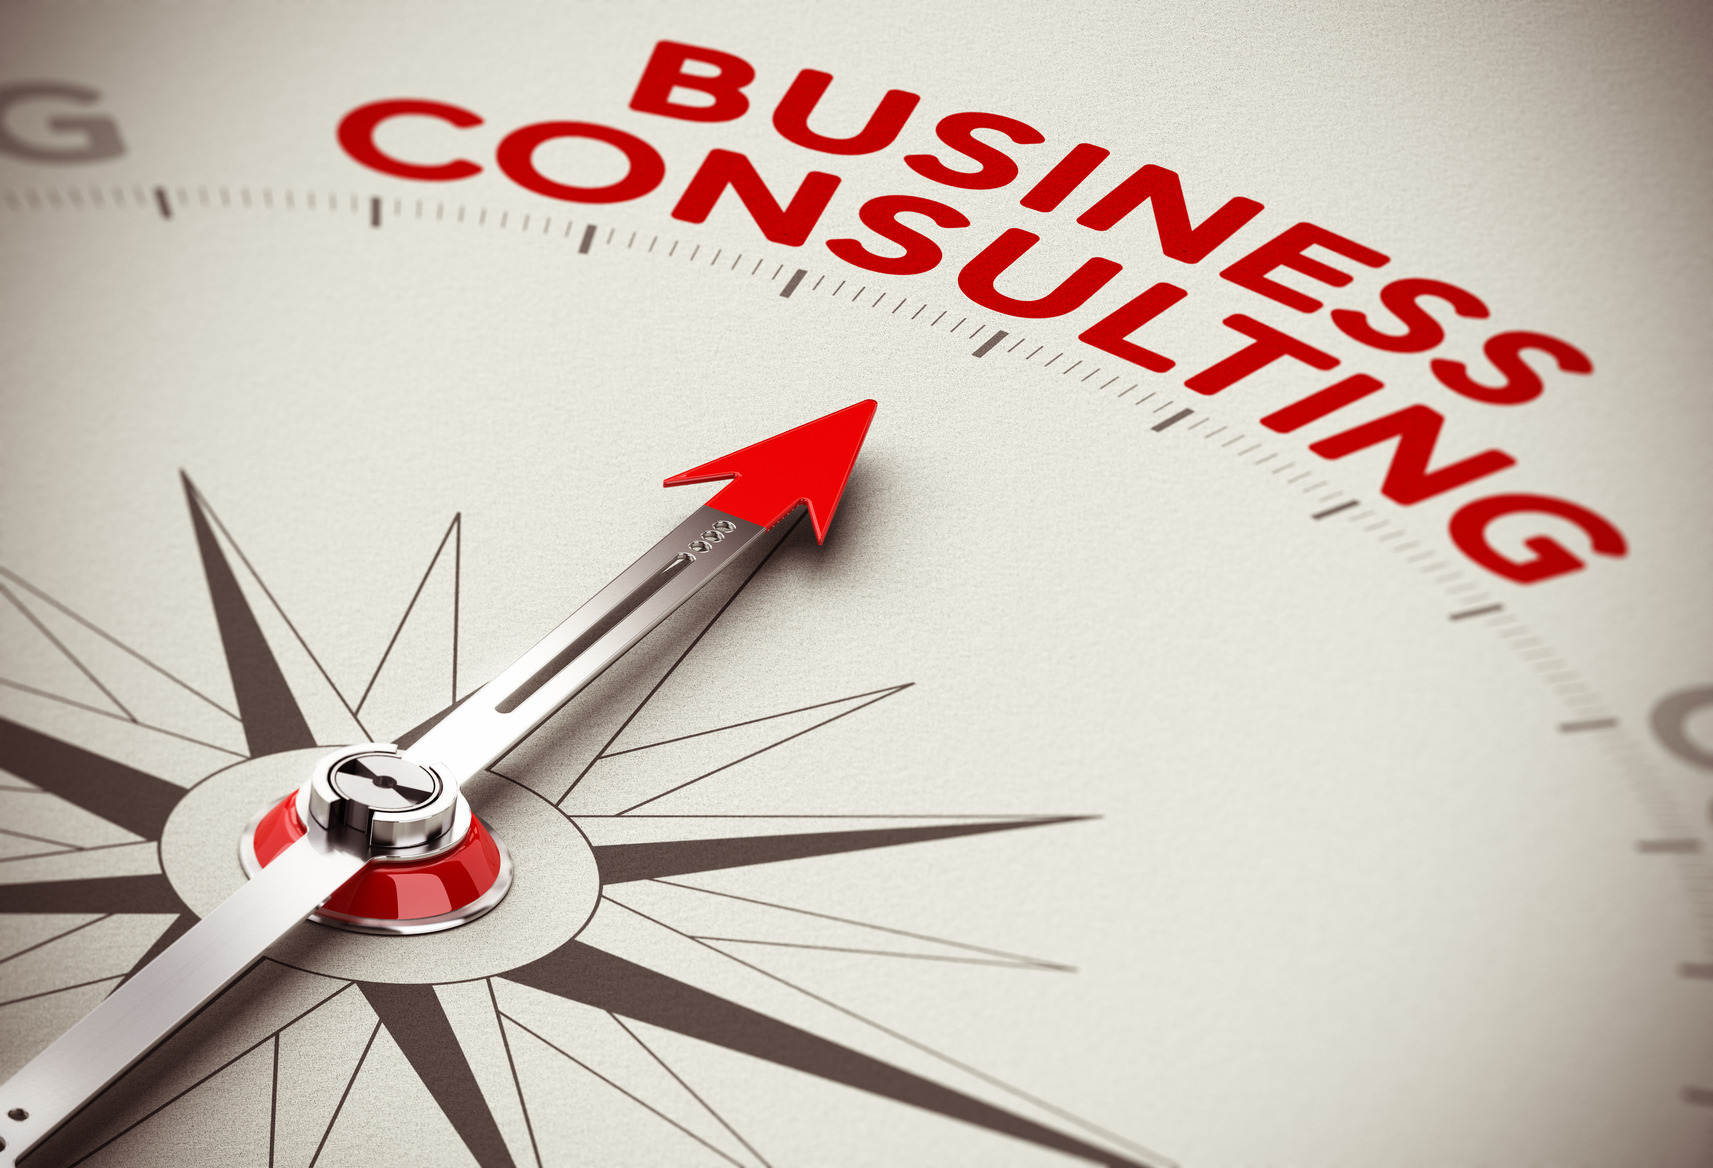 For Boosting Business, Hire a Consulting Firm